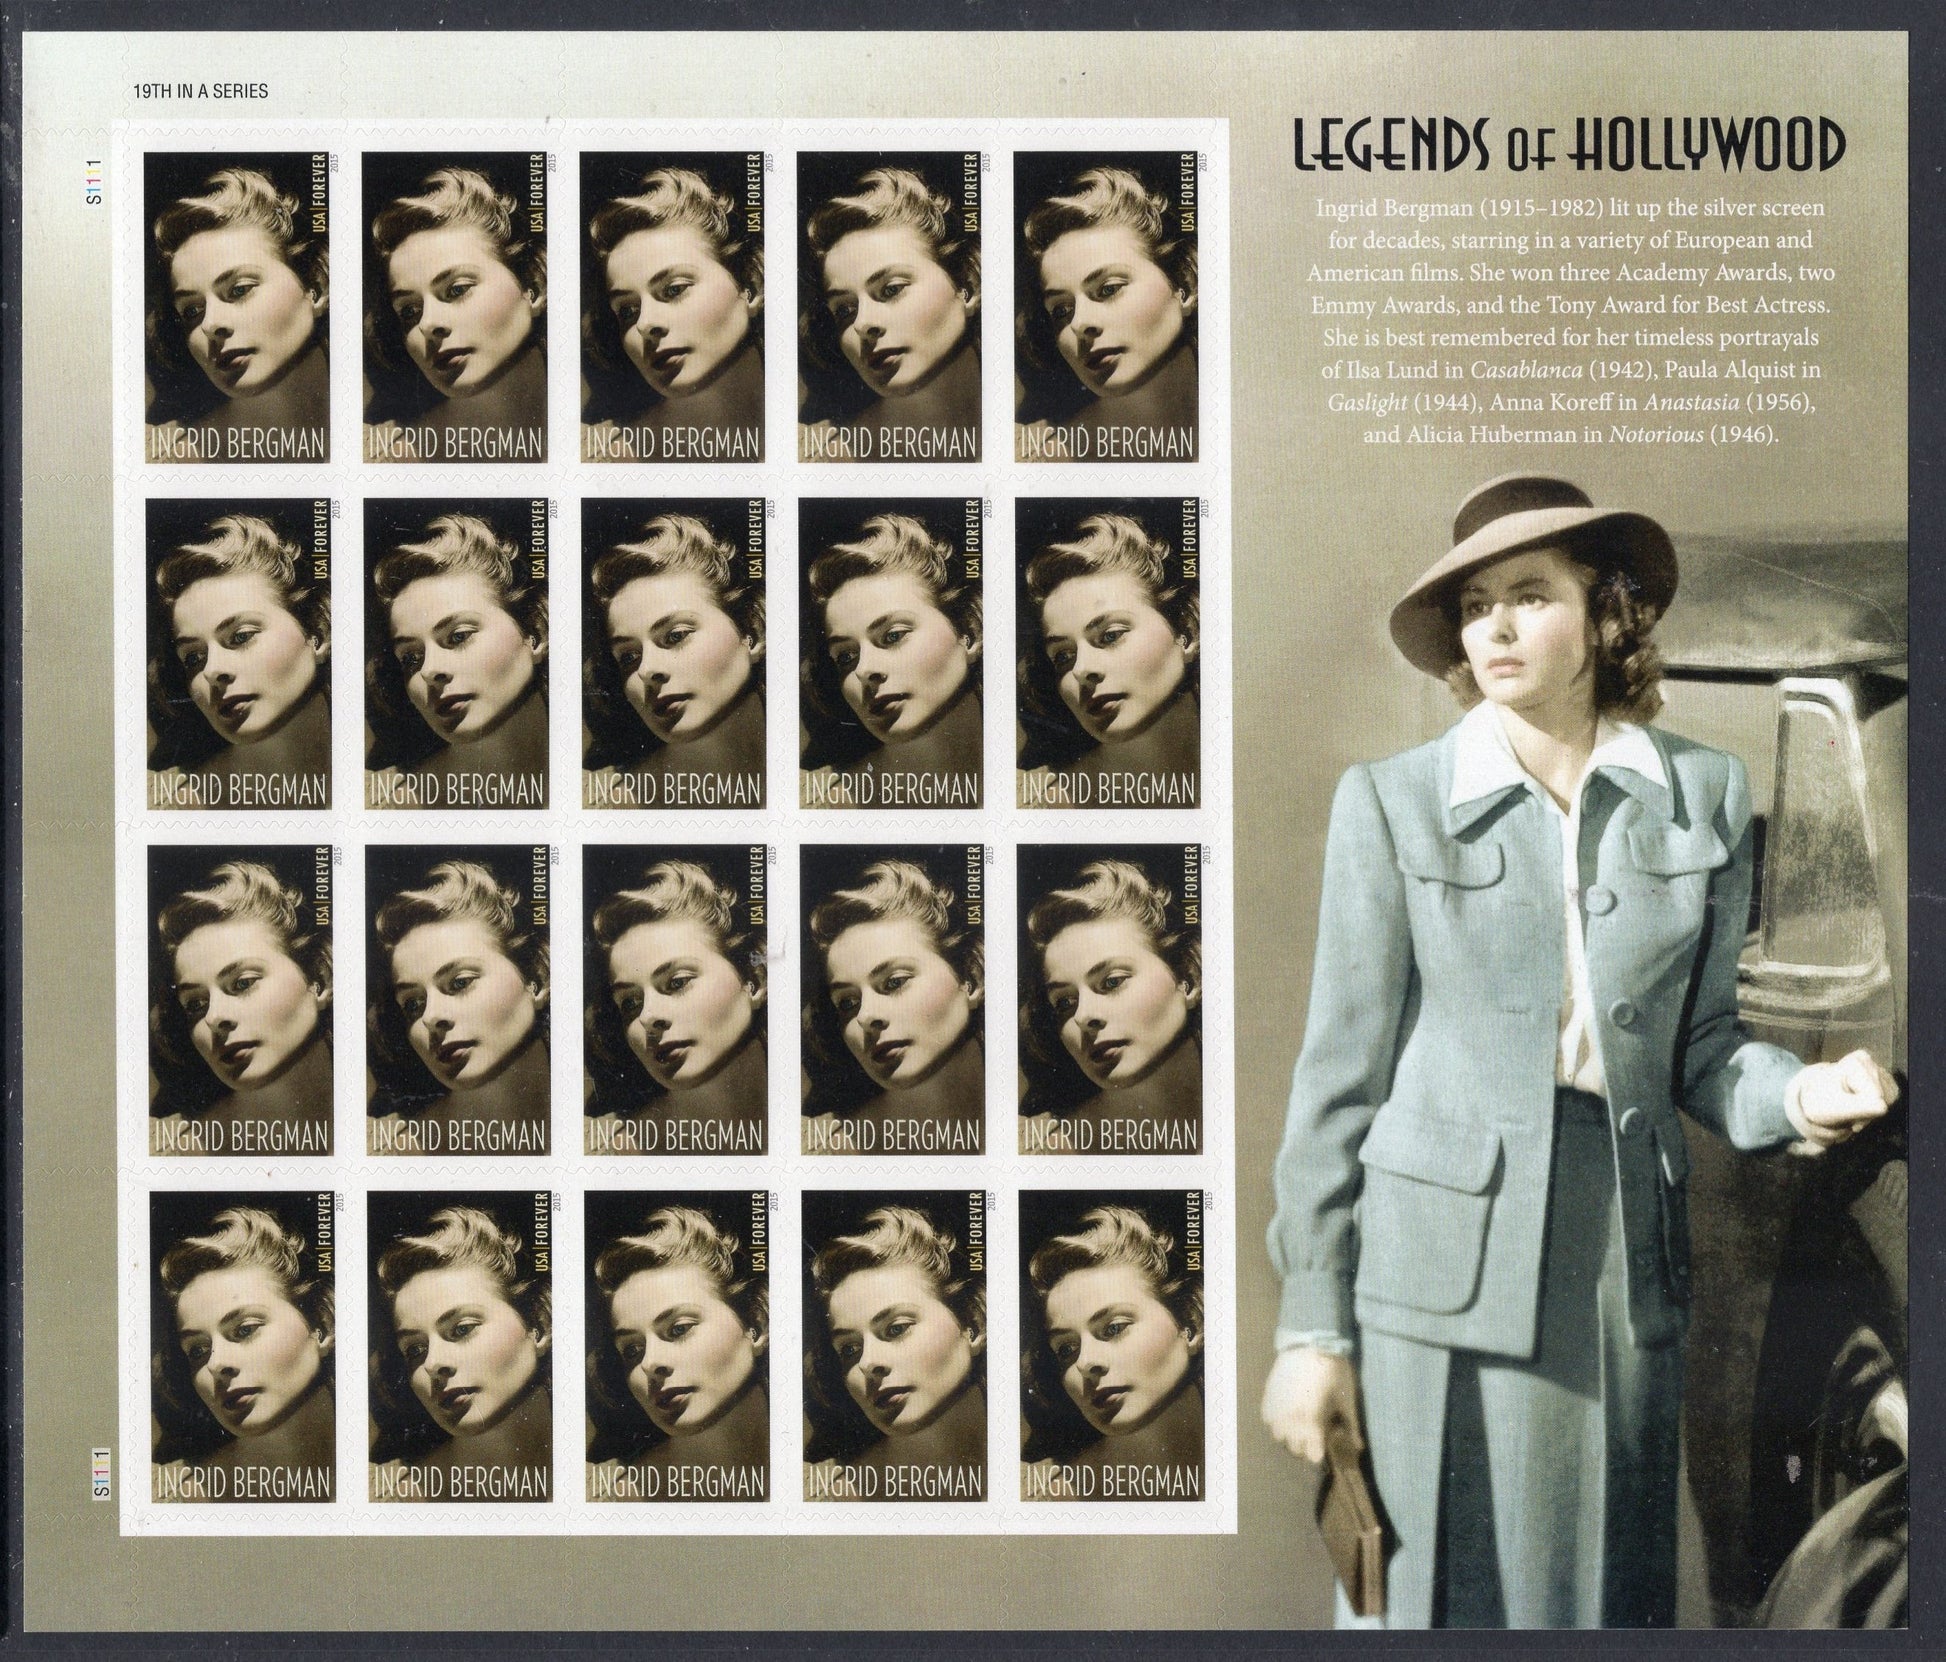 INGRID BERGMAN - LEGENDARY ACTRESS - SPECIAL DECORATIVE SHEET of 20 Stamps - A Great Gift - Issued in 2015